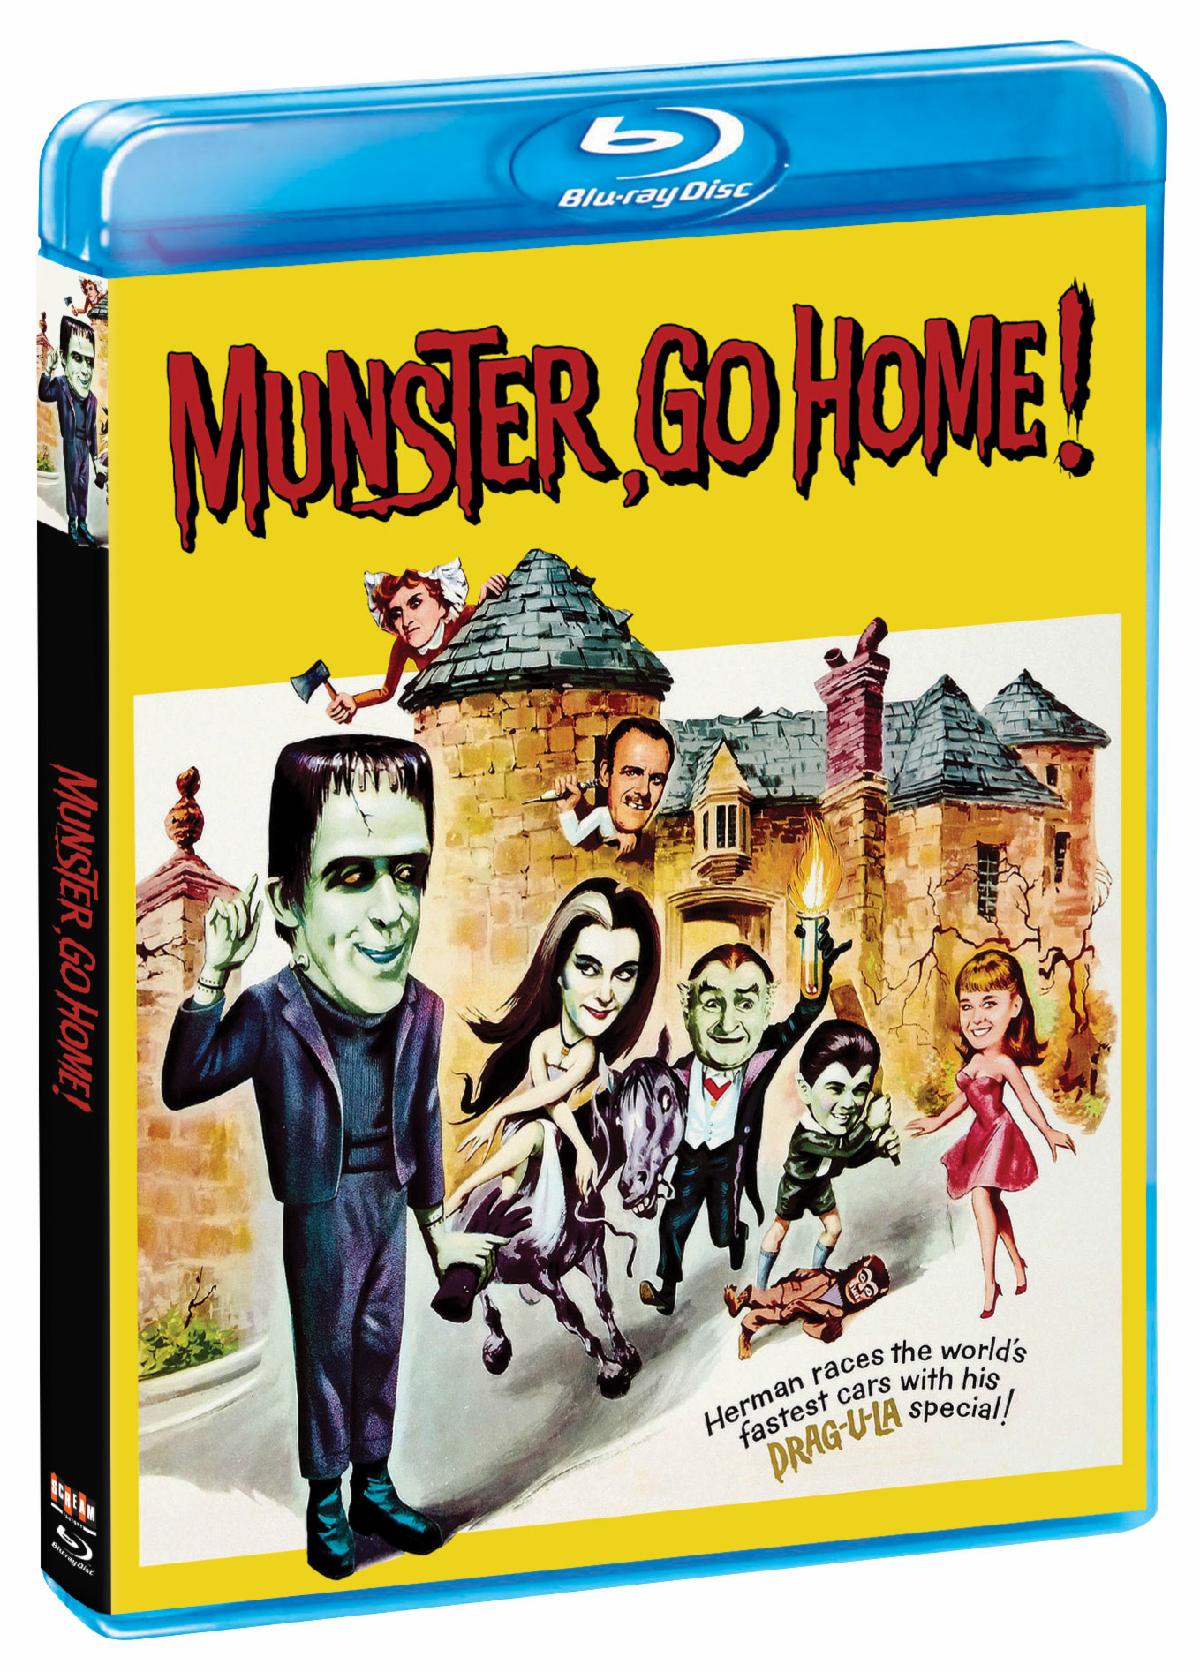 Munster, Go Home! on Blu-ray